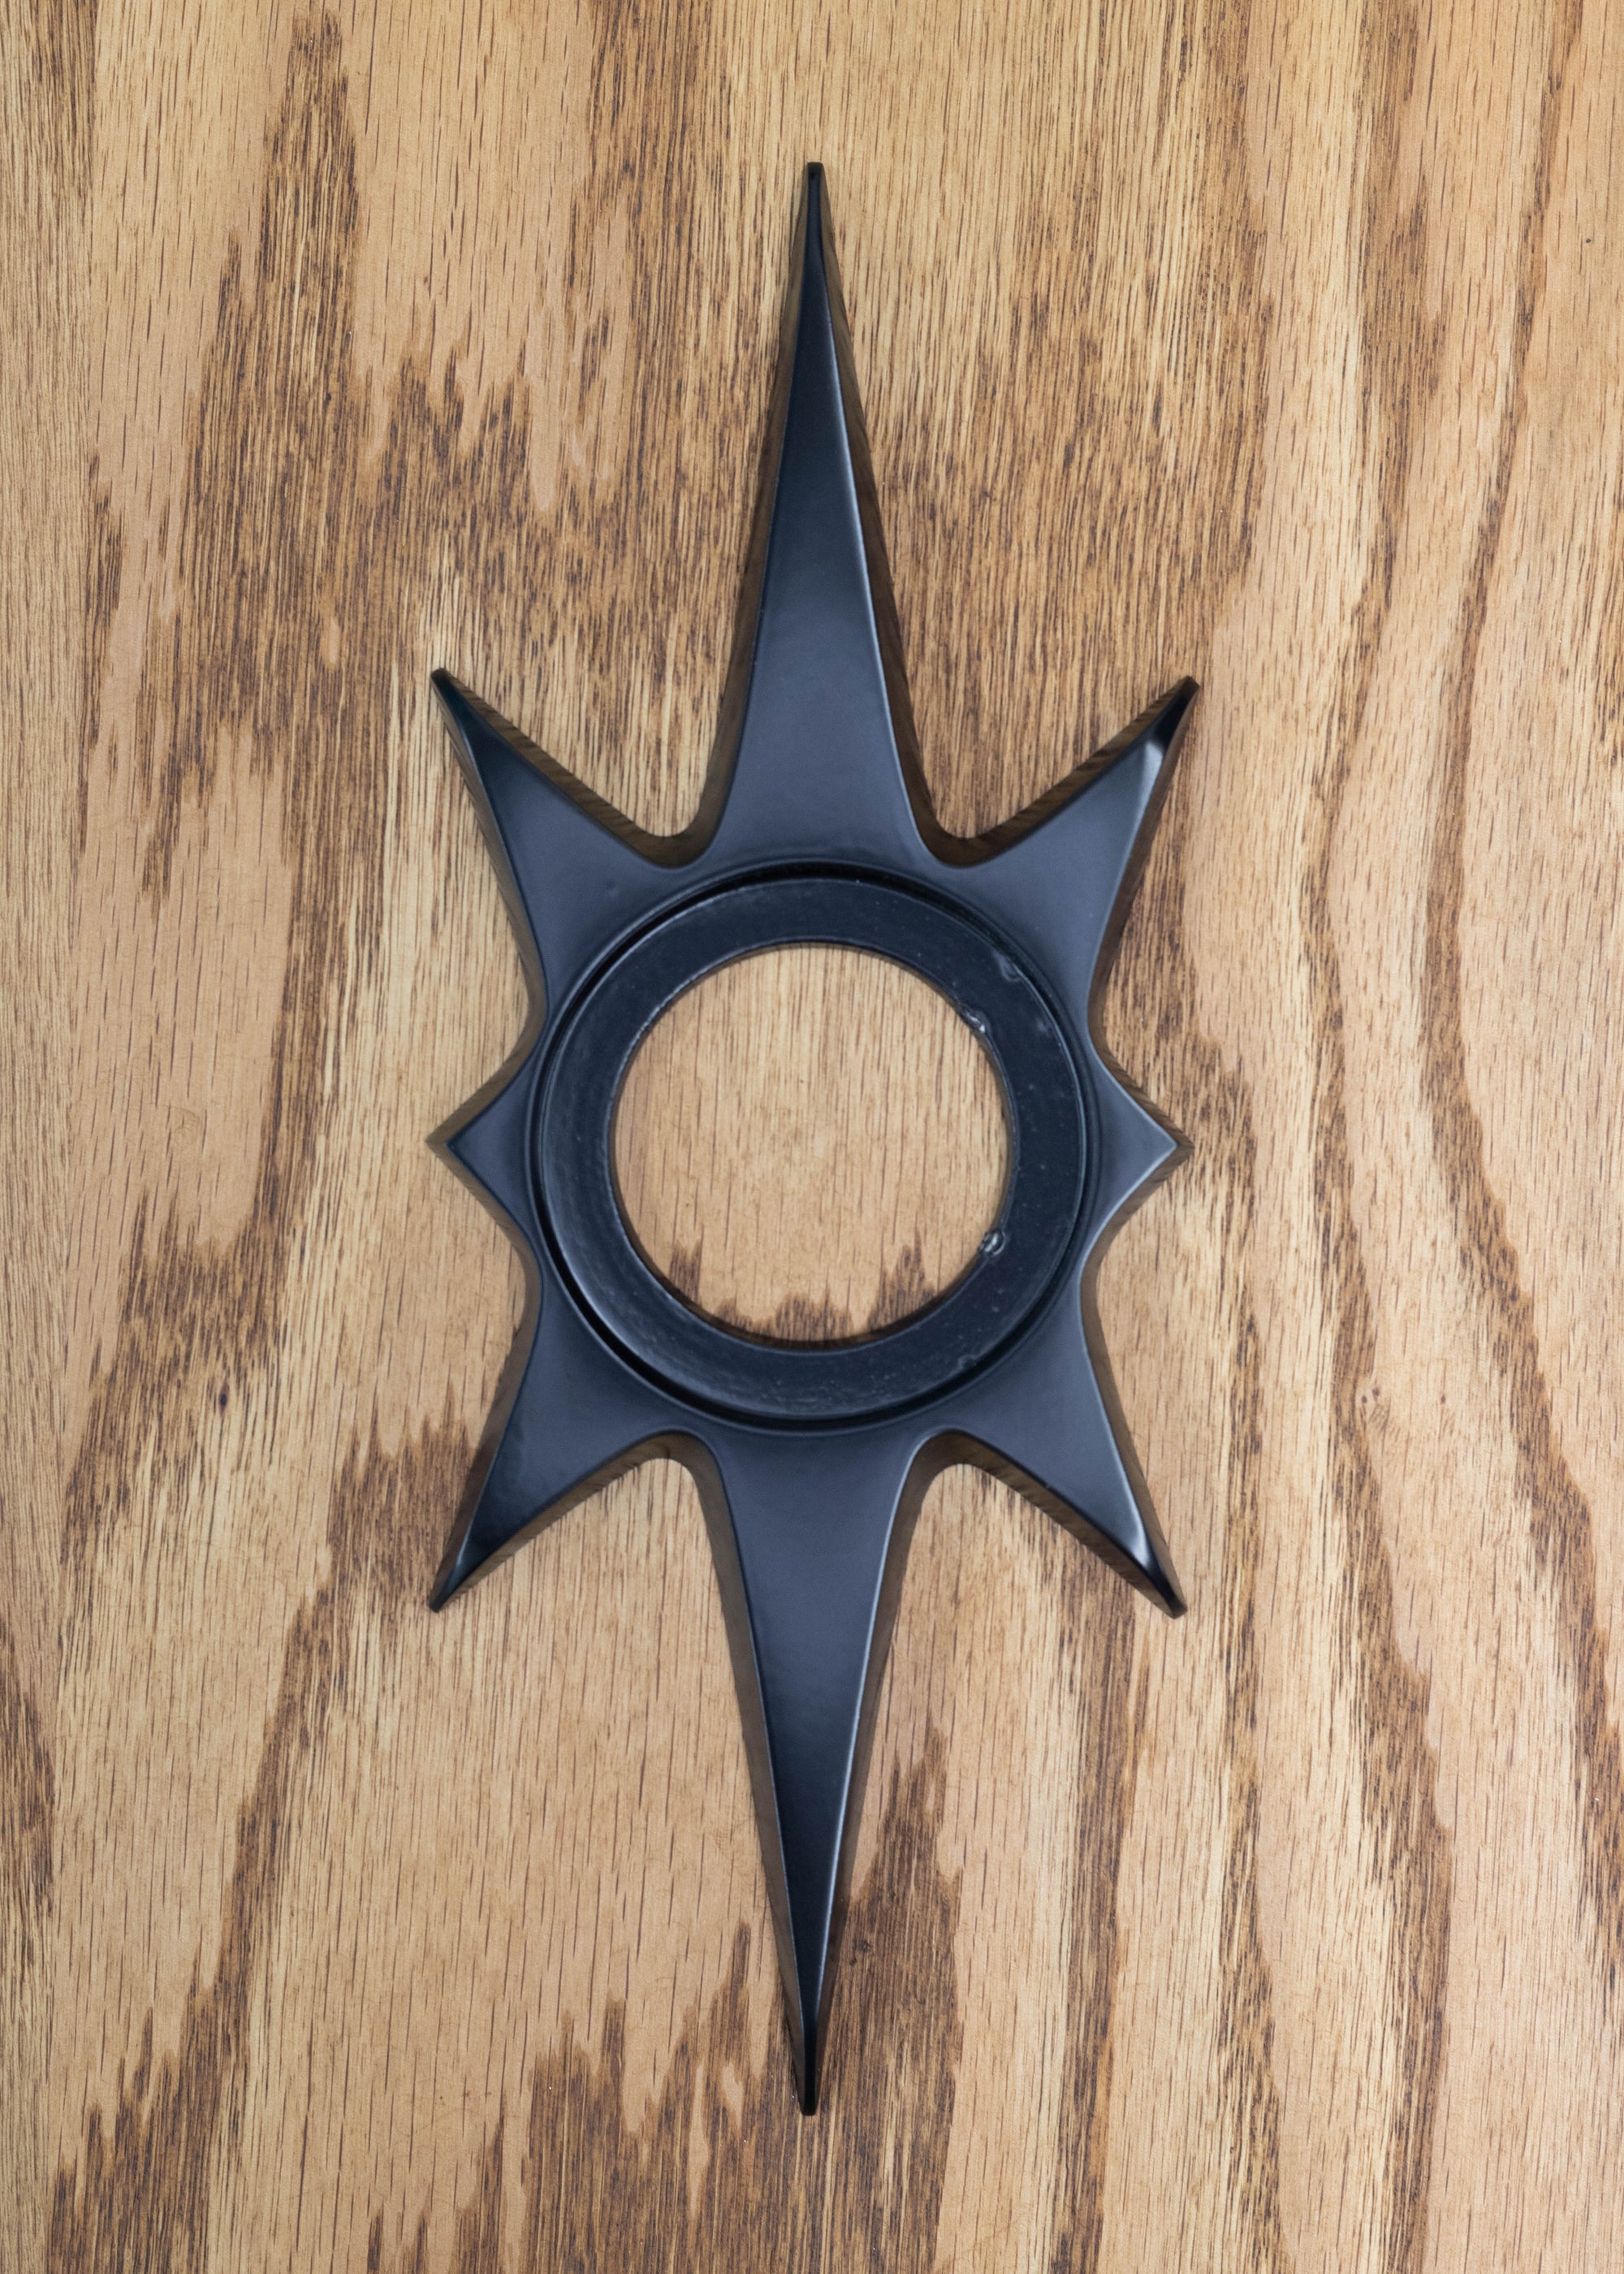 The matte black starburst dooknob escutcheon. It has an inset open circle in the center where the doorknob sits and attaches to the door. The black powder coating is a nice satin finish with slight smooth reflection of light, but is not glossy.